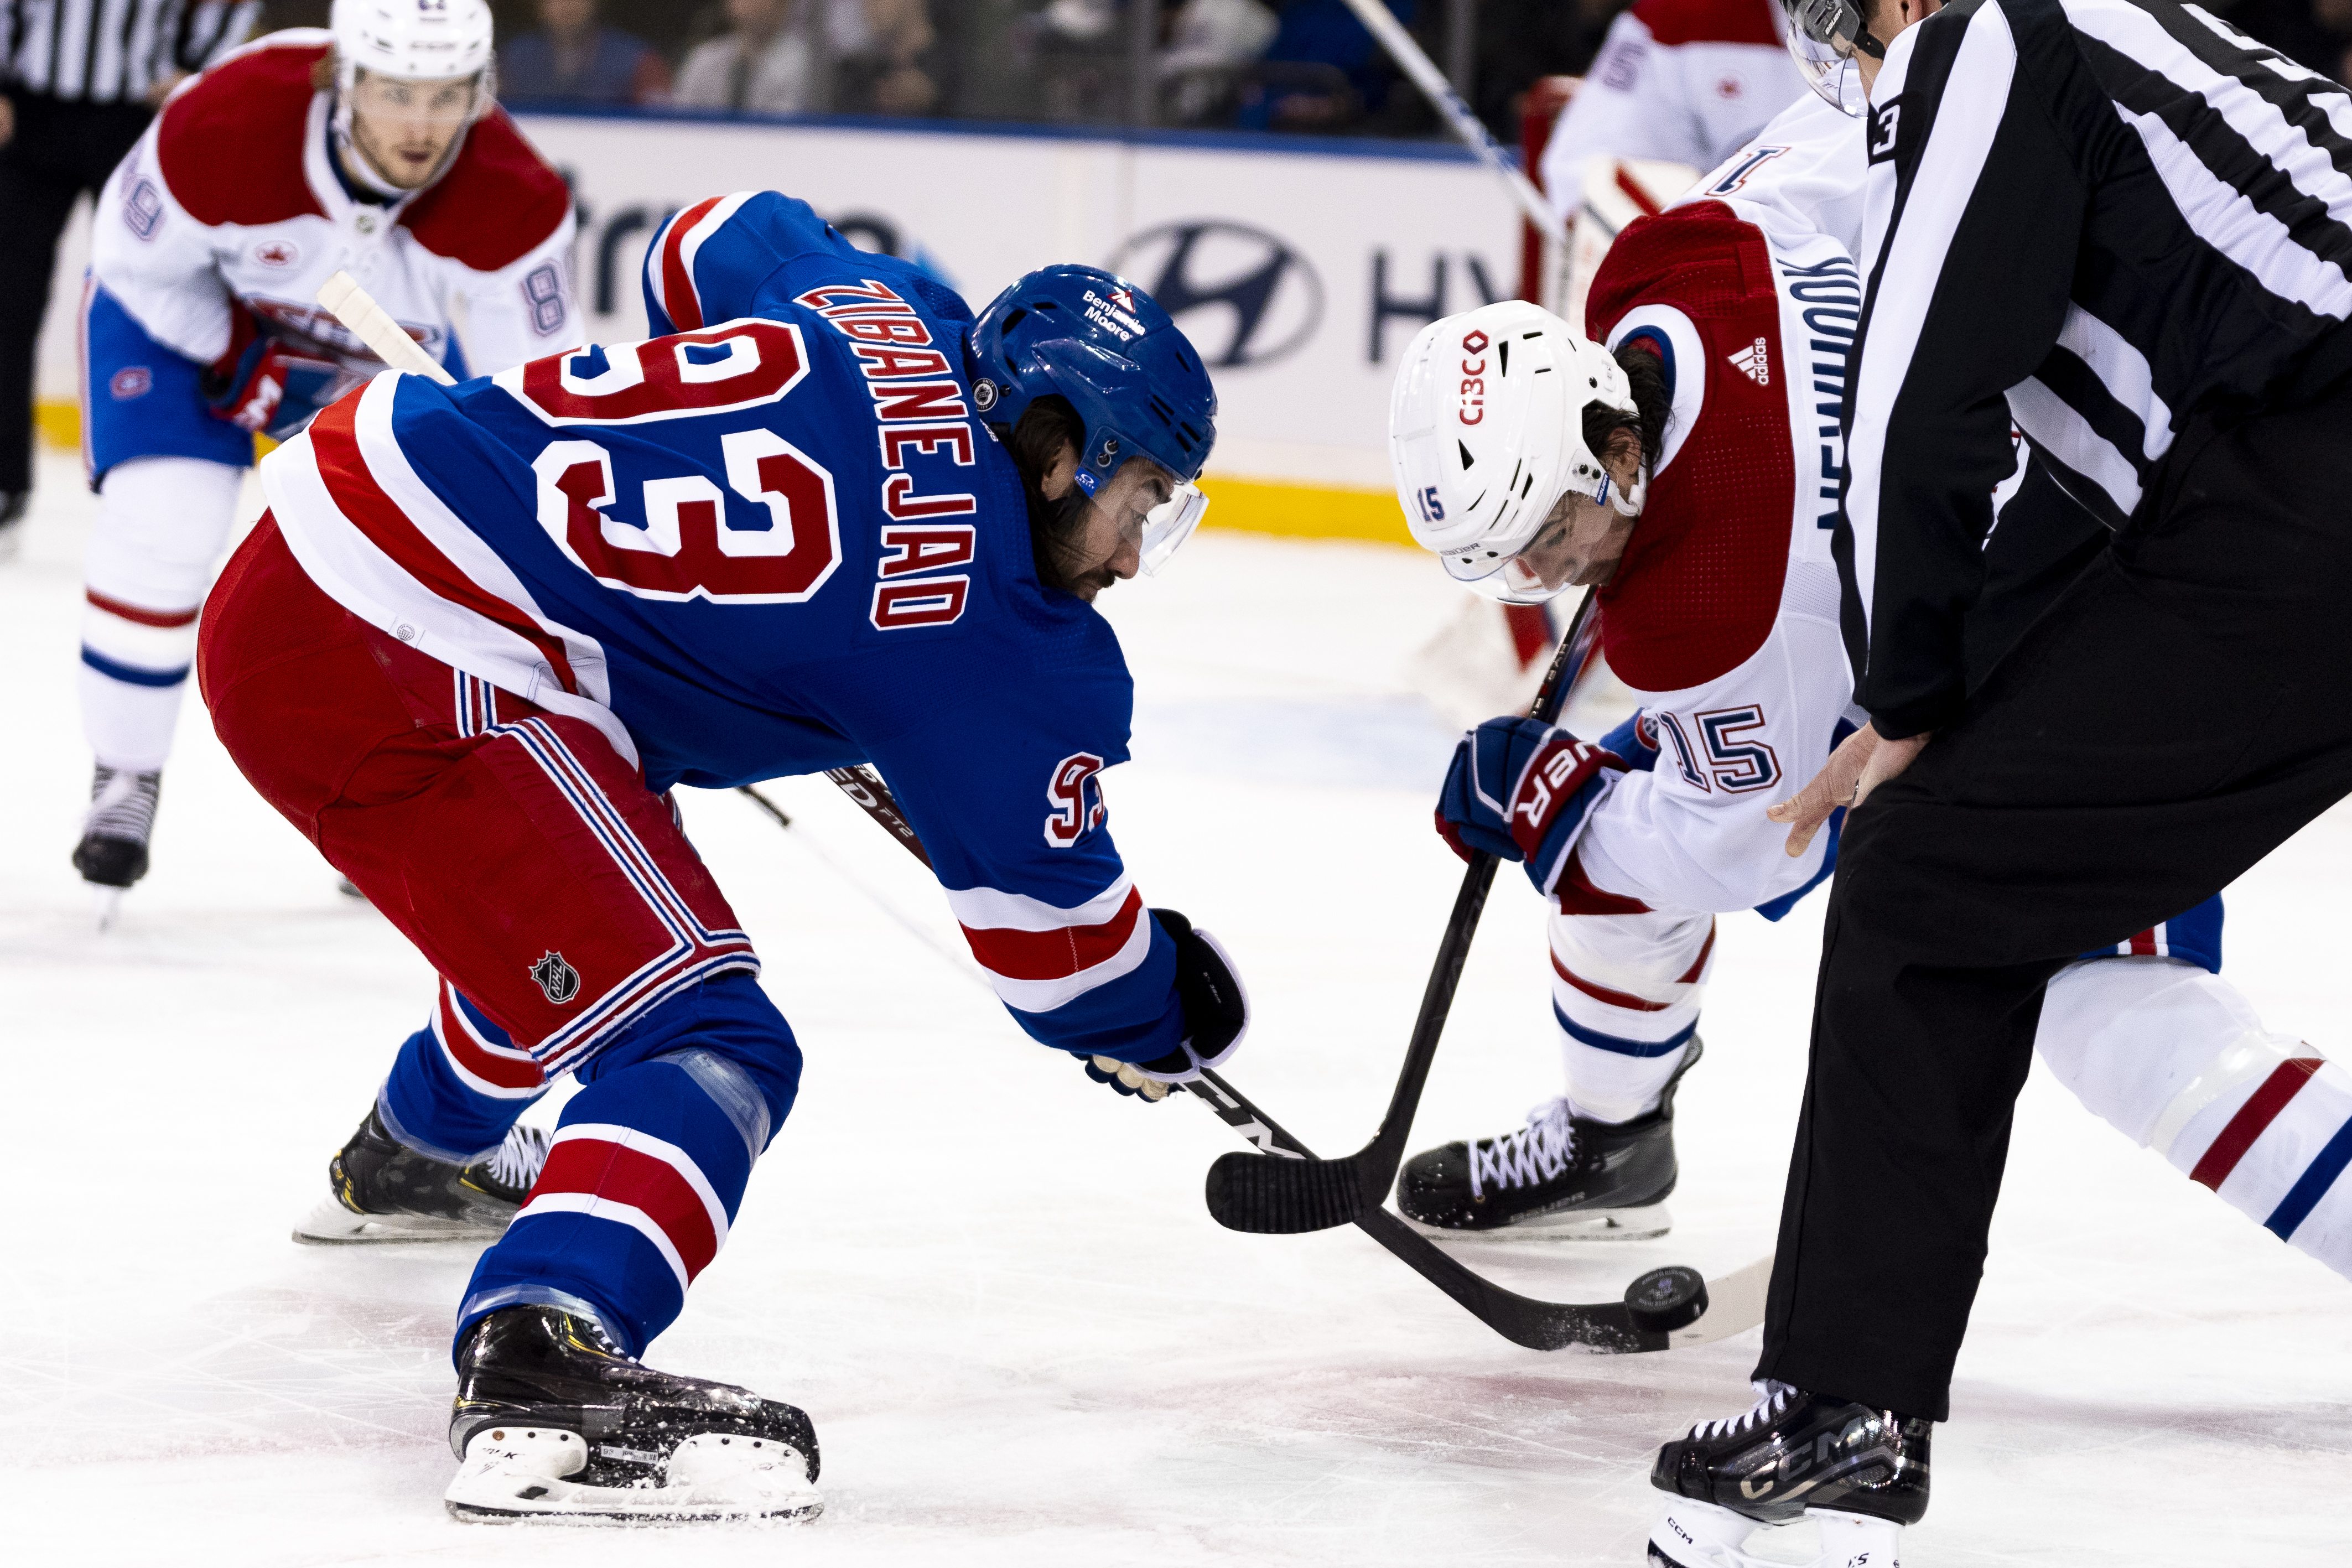 Call of the Wilde: After strong start, Montreal Canadians fall to New York Rangers 7-4